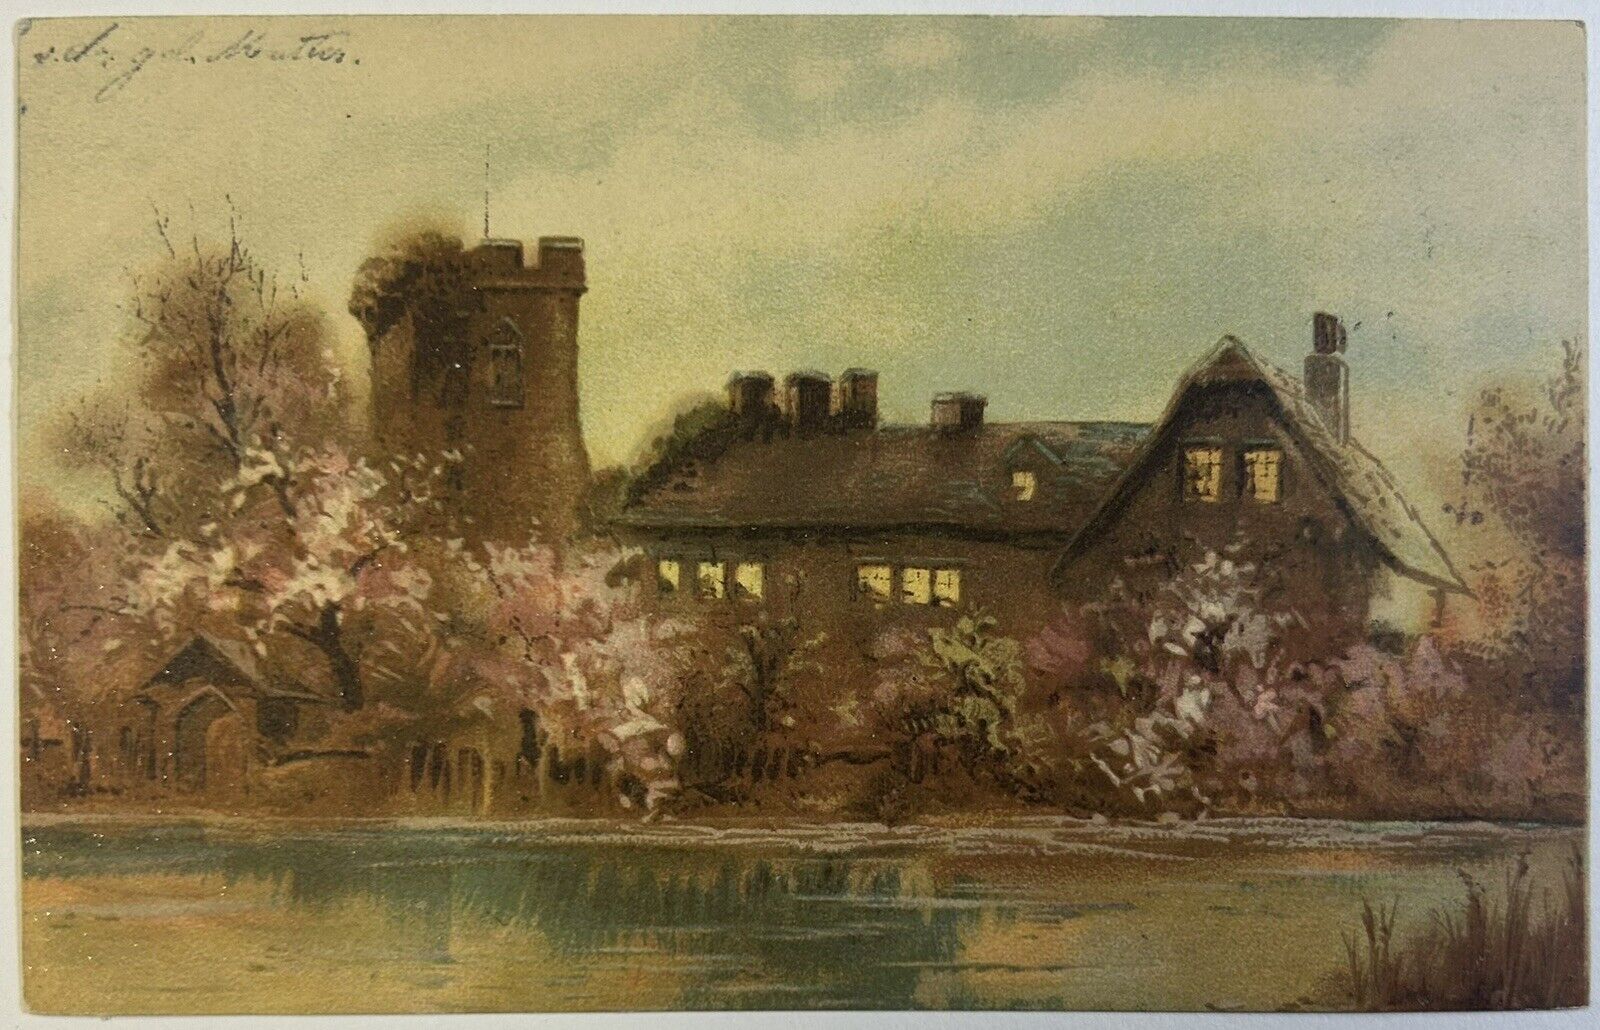 Spring Scenery Antique Chateau On River Postcard, Posted 1905 St. Louis, MO